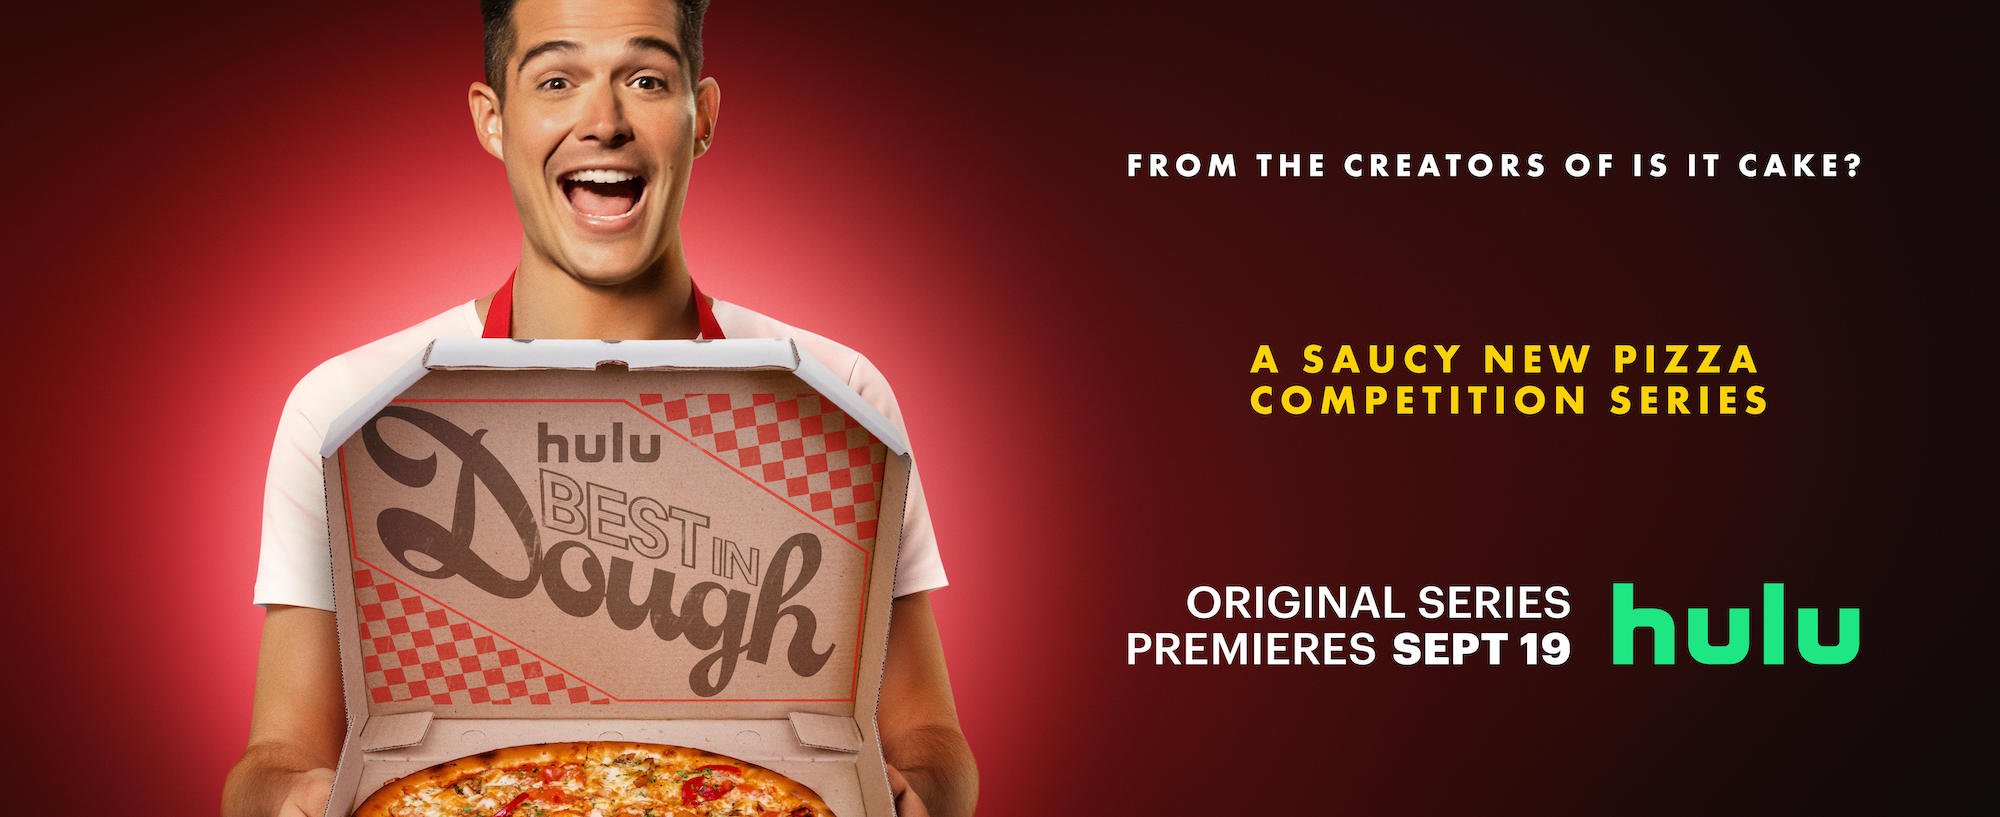 Hulu Original 'Best in Dough' arrives in September. Wells Adams, seen here holding a pizza, hosts the food competition.